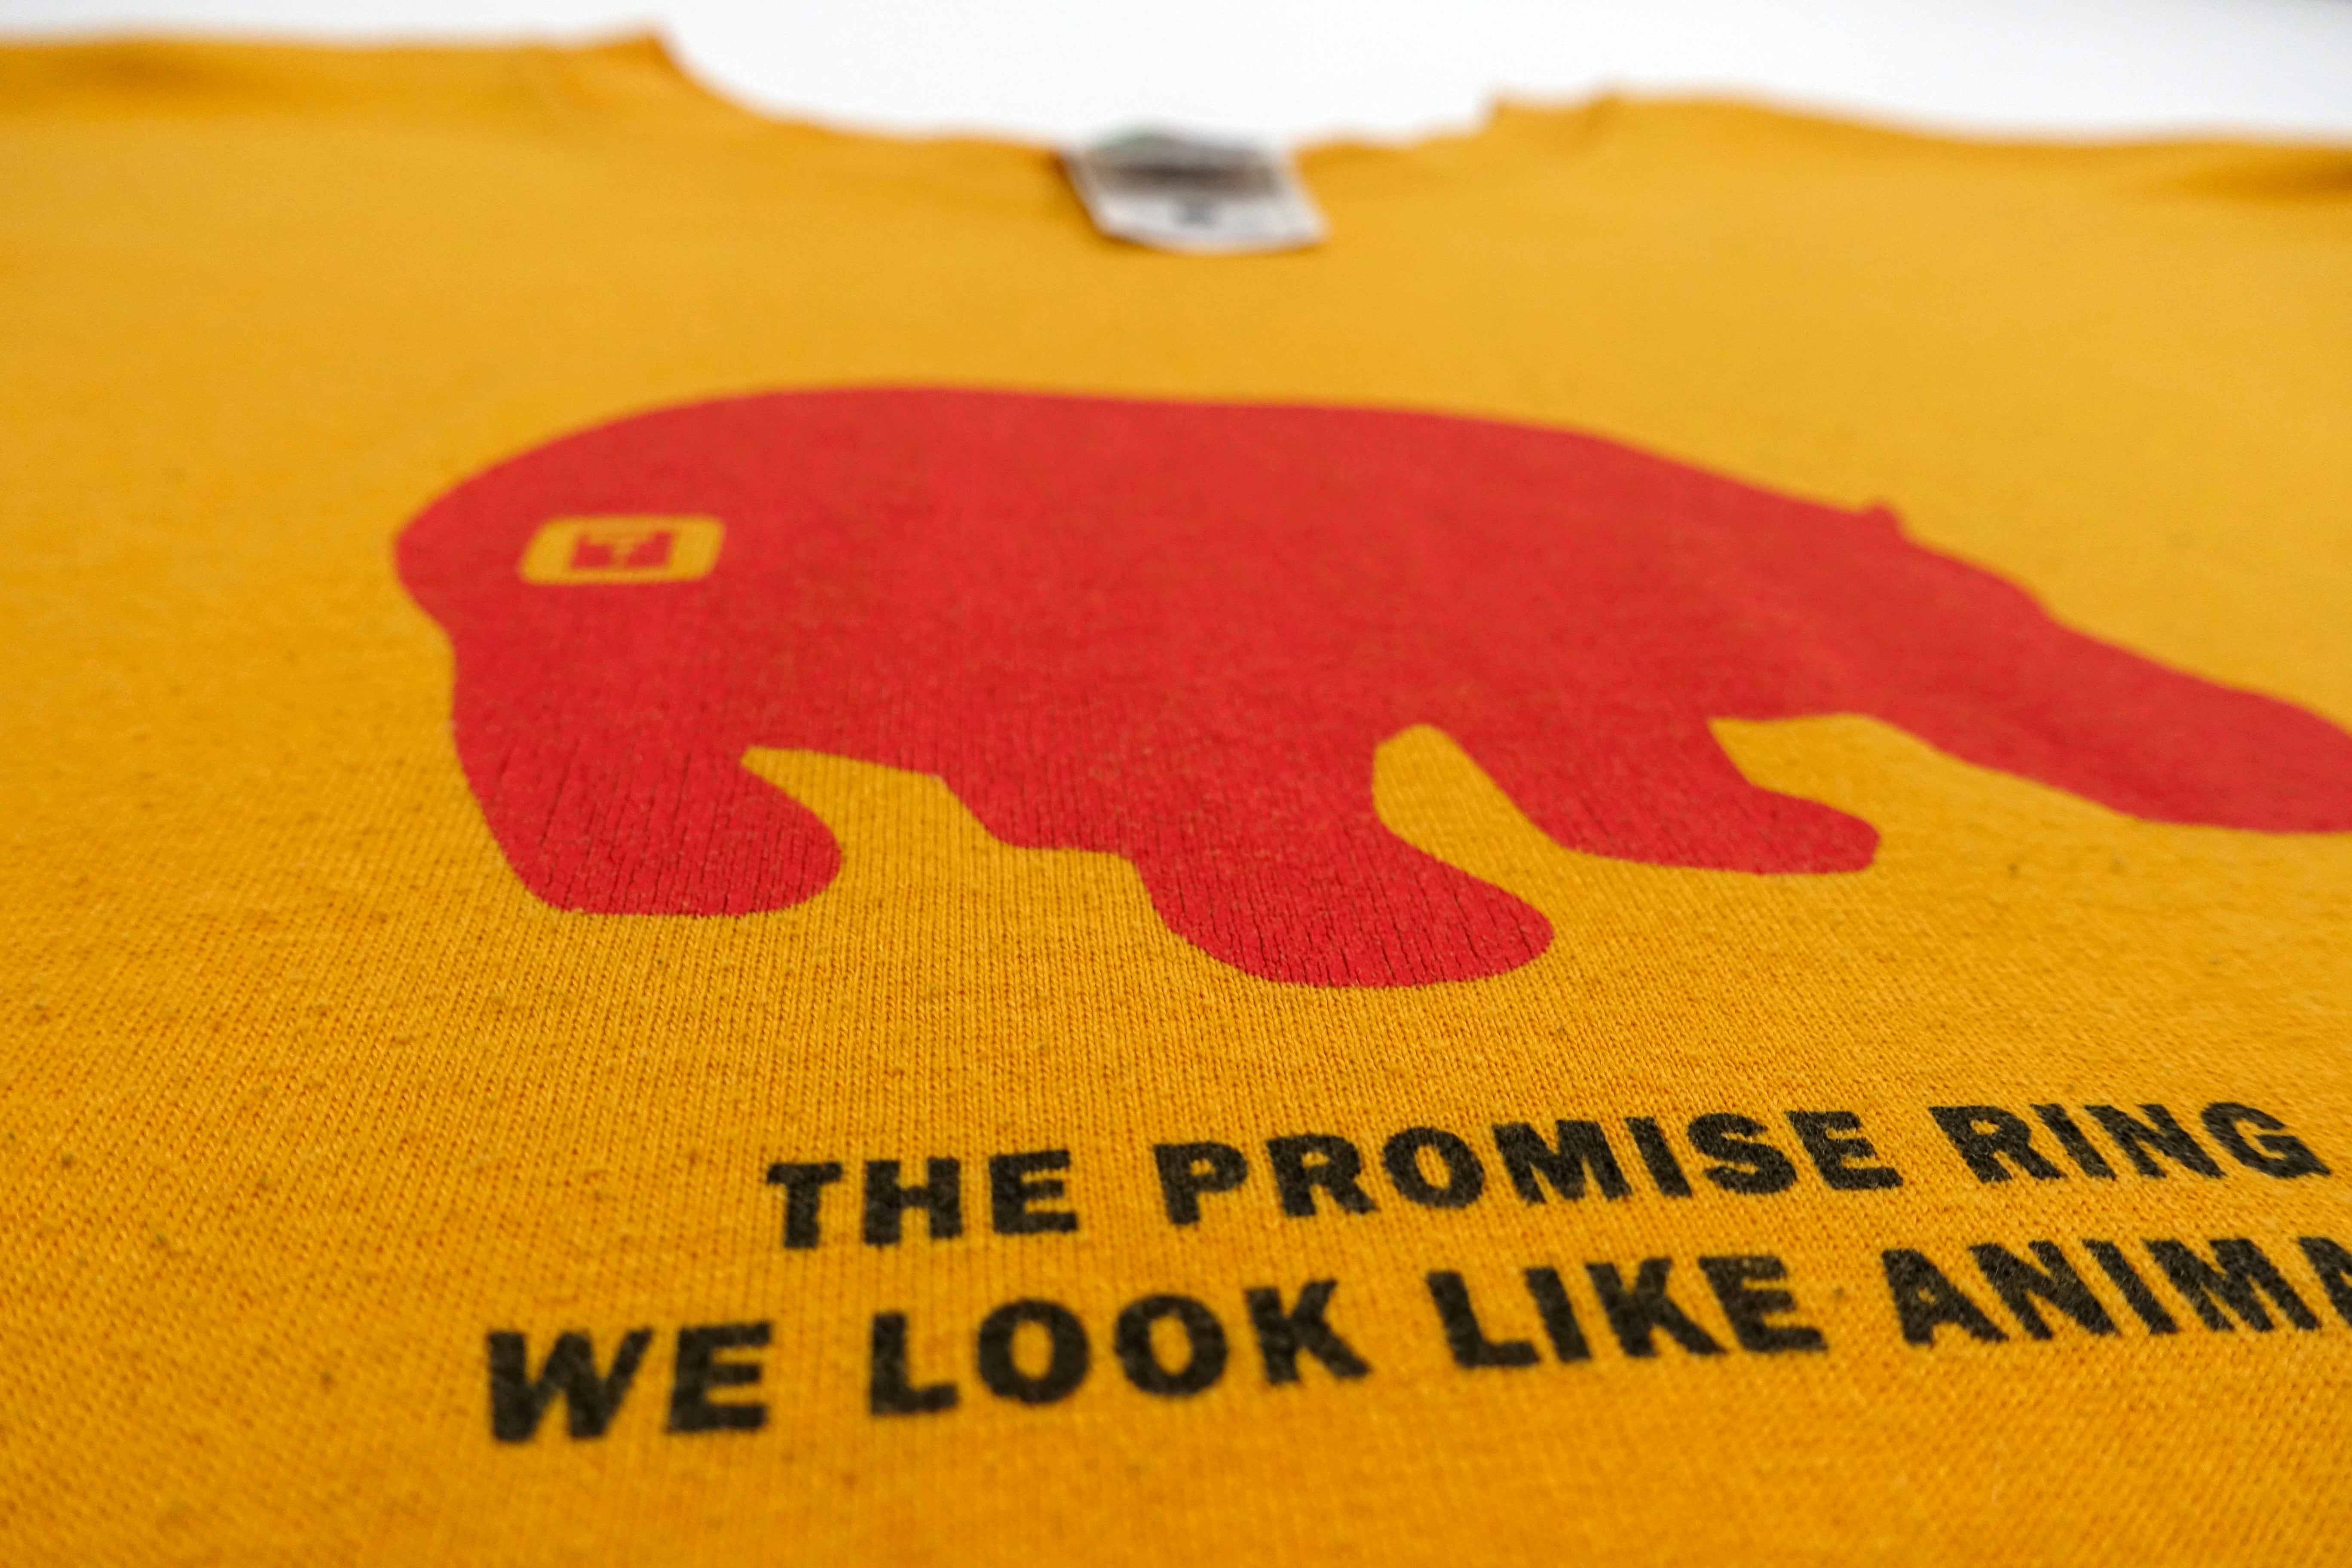 Promise Ring - We Look Like Animals Yellow 2000 Tour Shirt Size Large